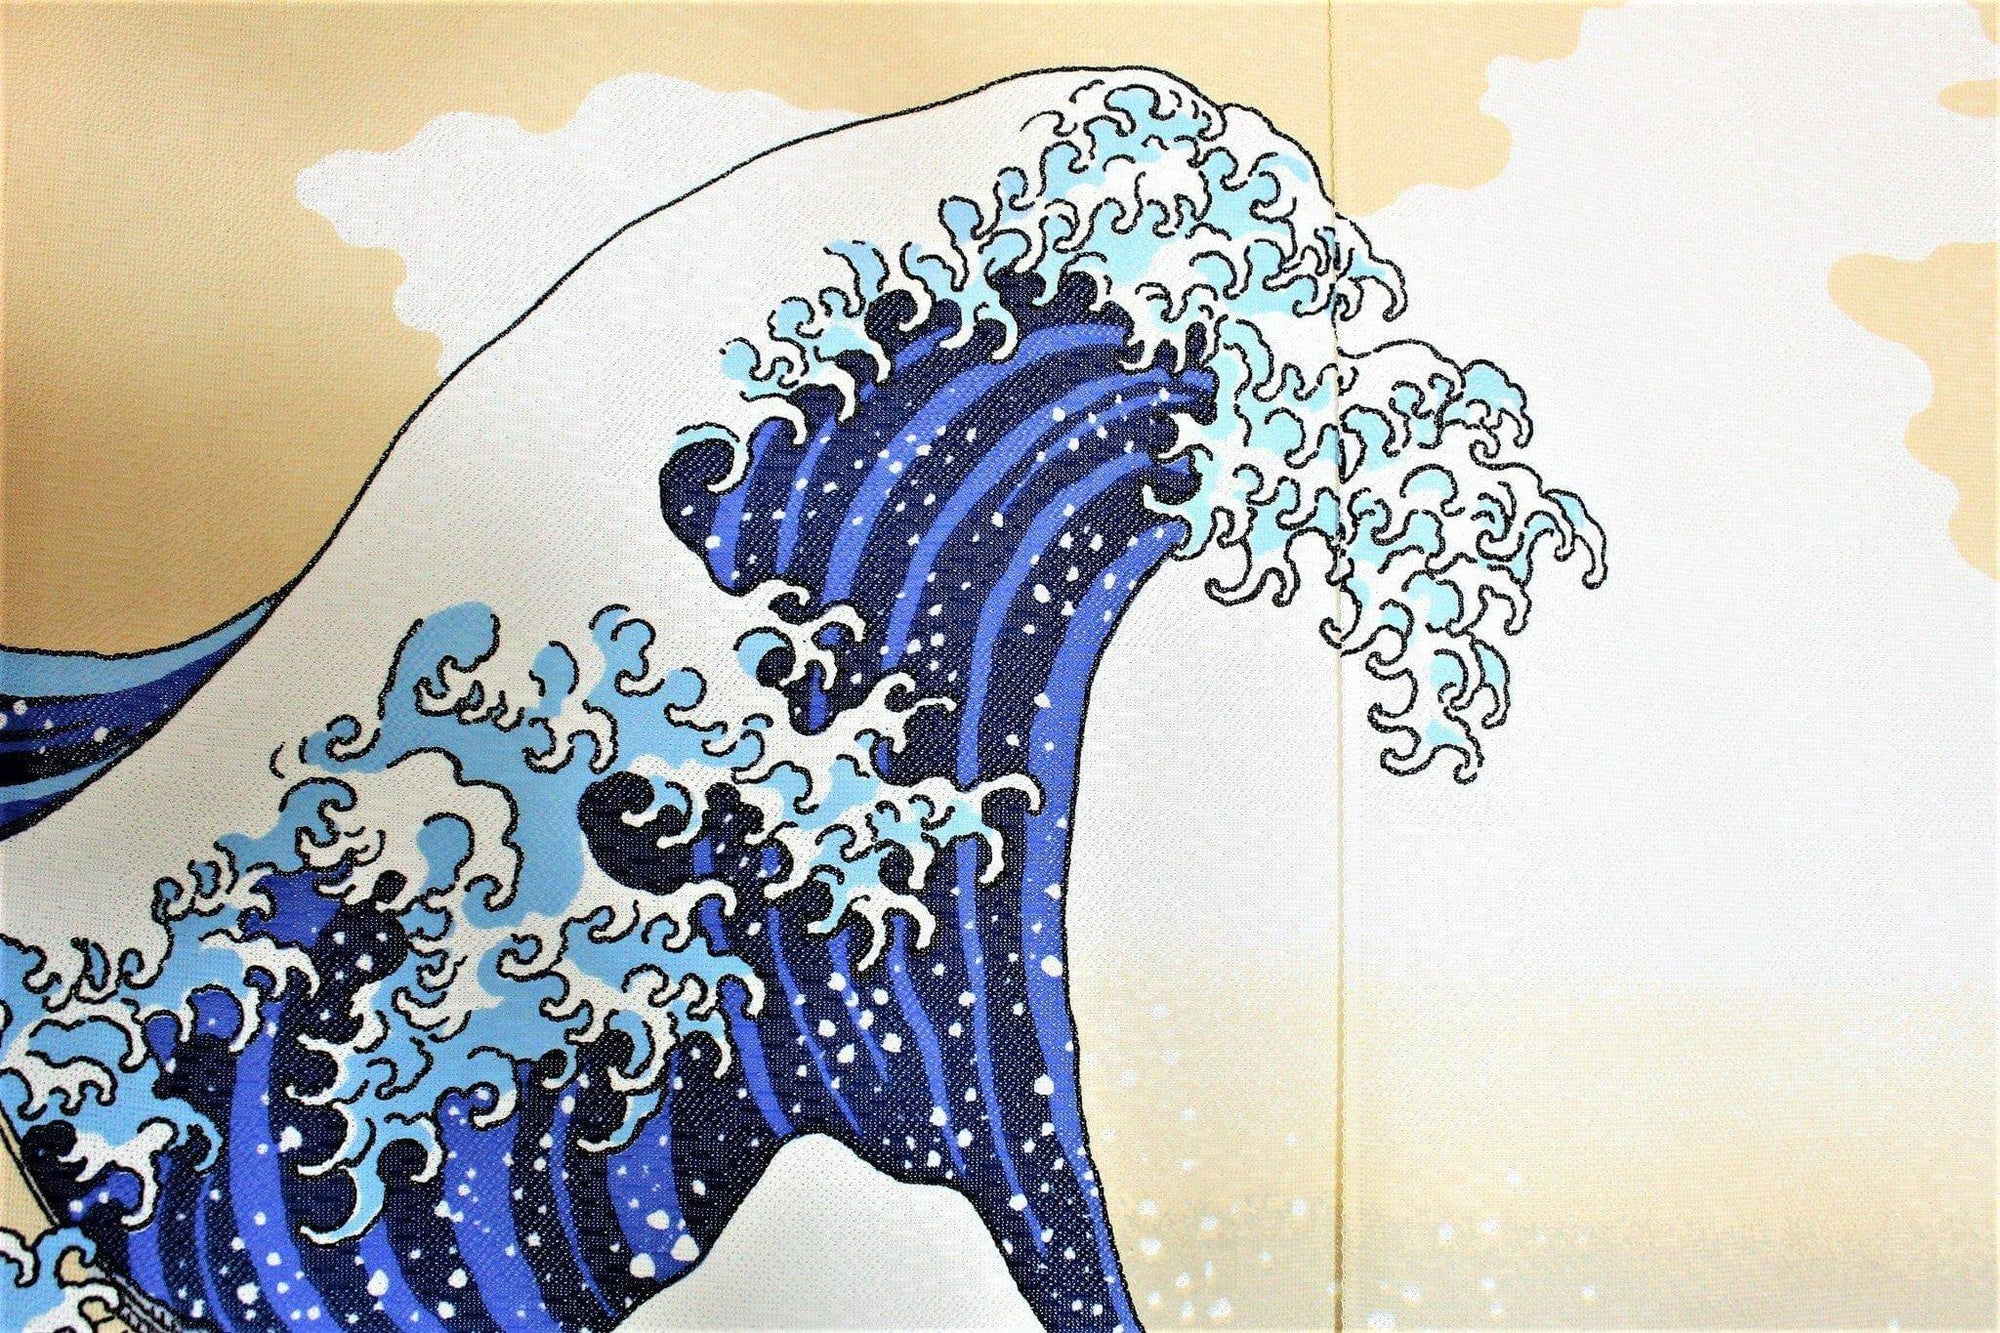 Japanese Decor - Japanese Noren Curtain With Light Fabric - The Great Wave Of Kanagawa